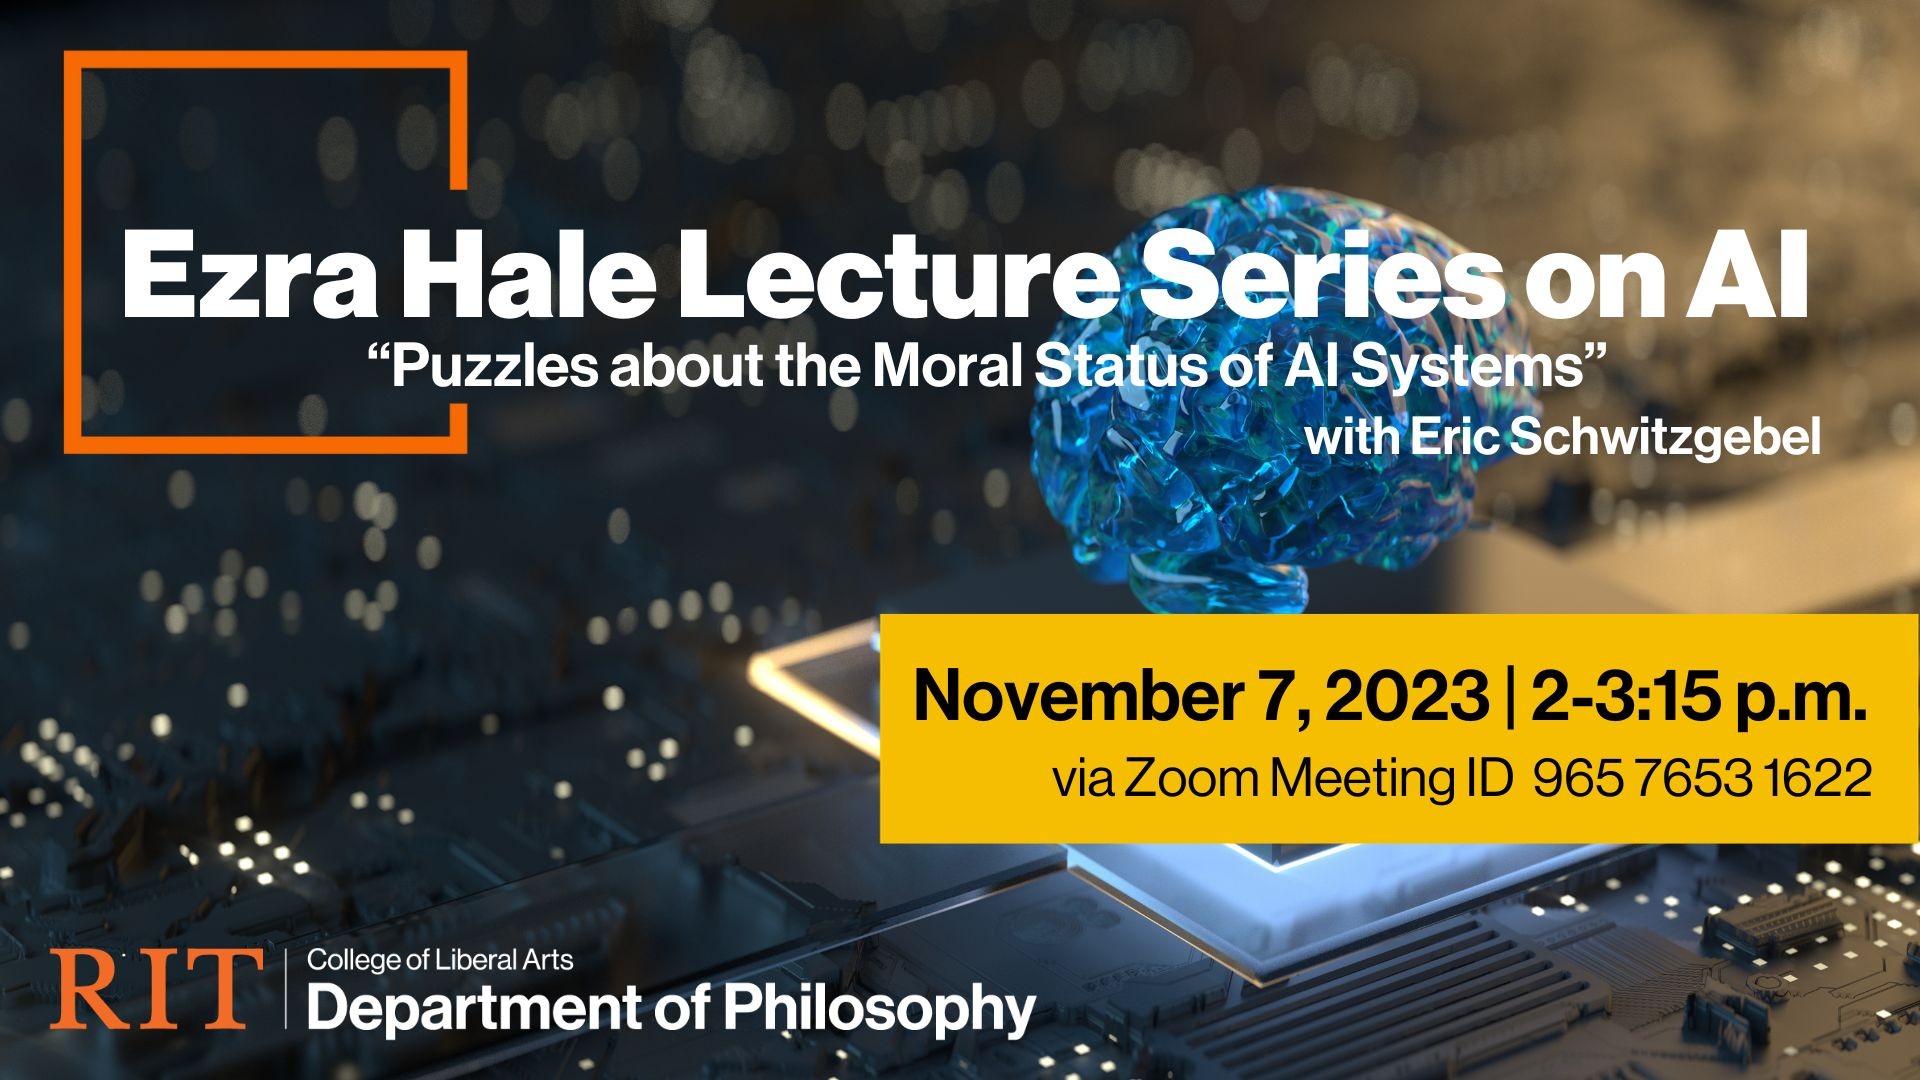 Artificial Intelligence image with information regarding the lecture via zoom